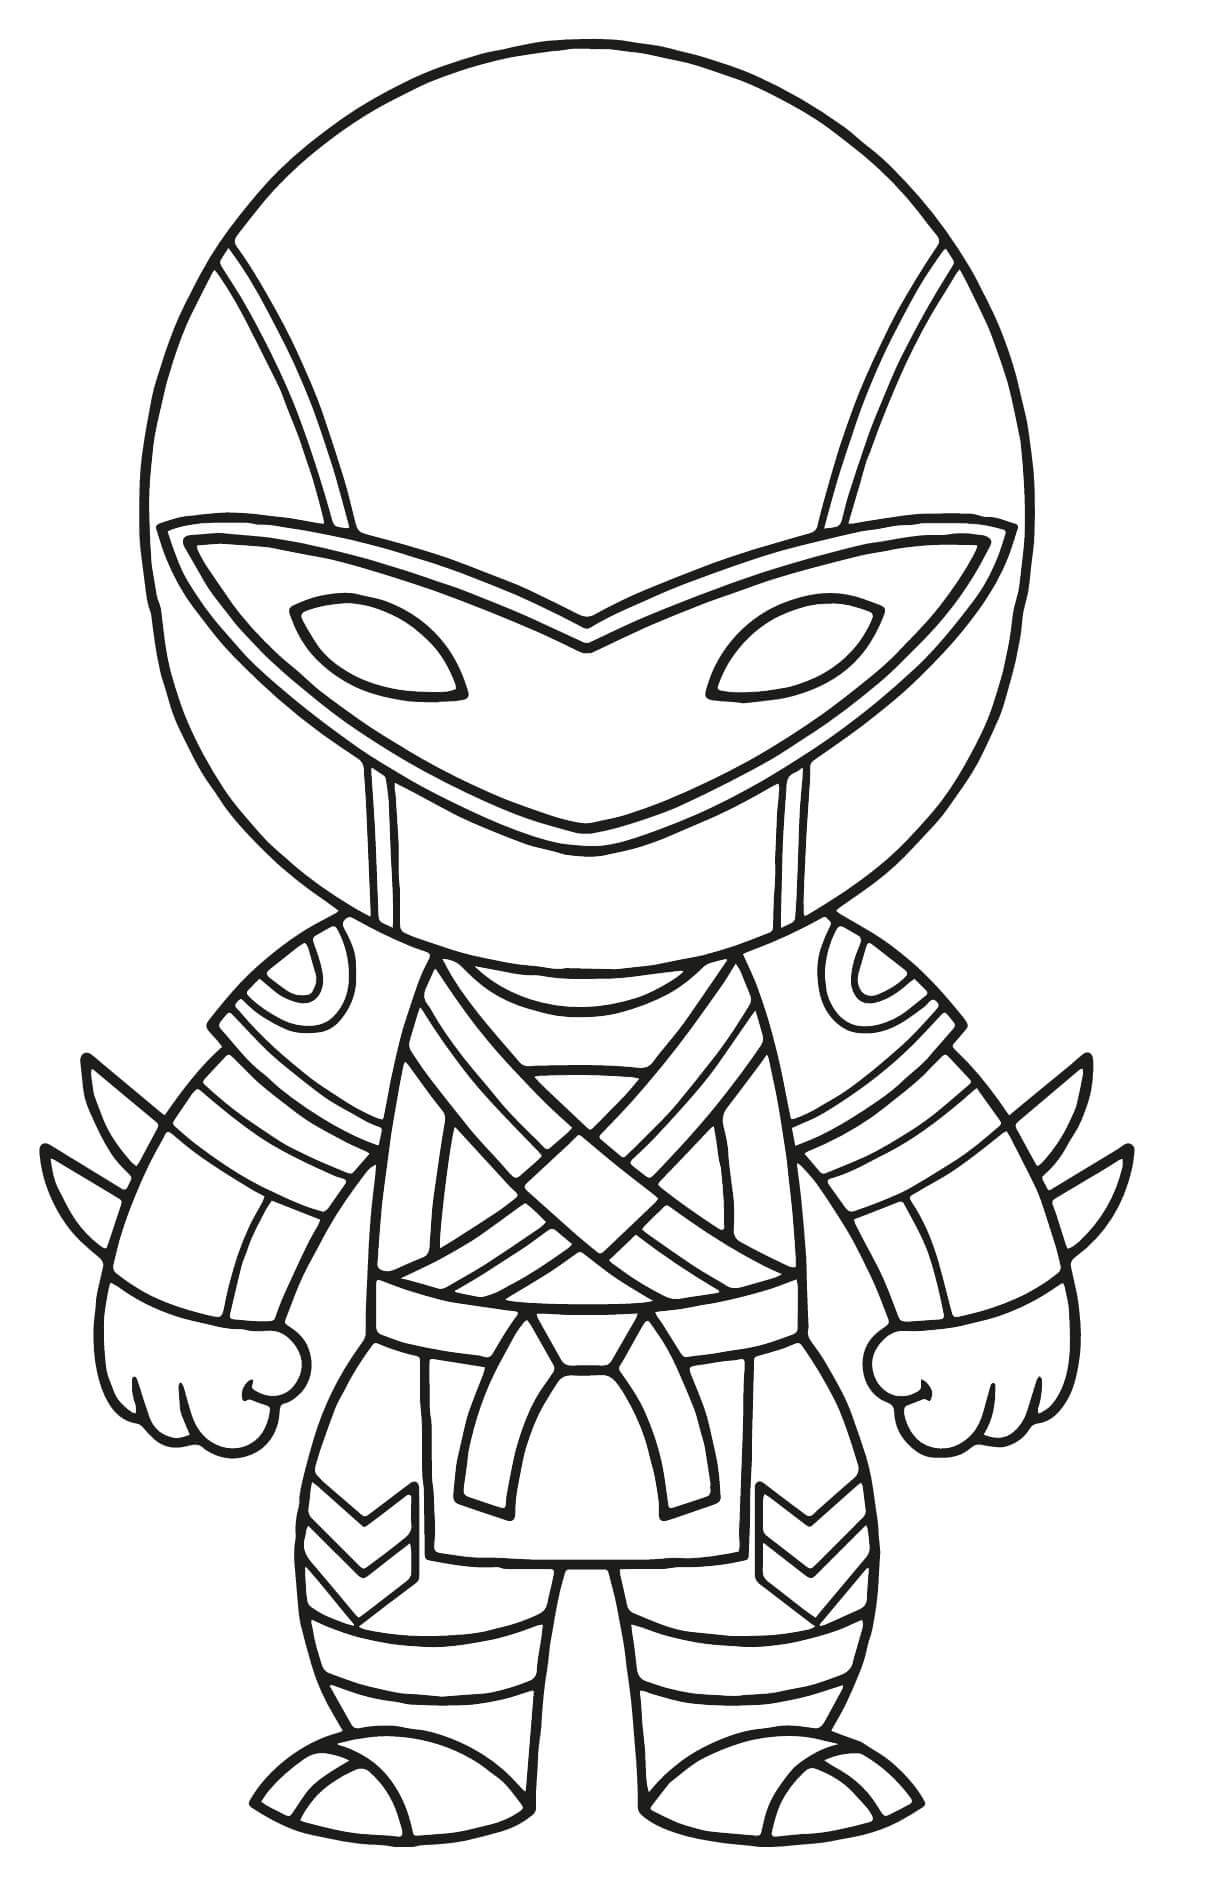 Cloaked Star Coloring Page